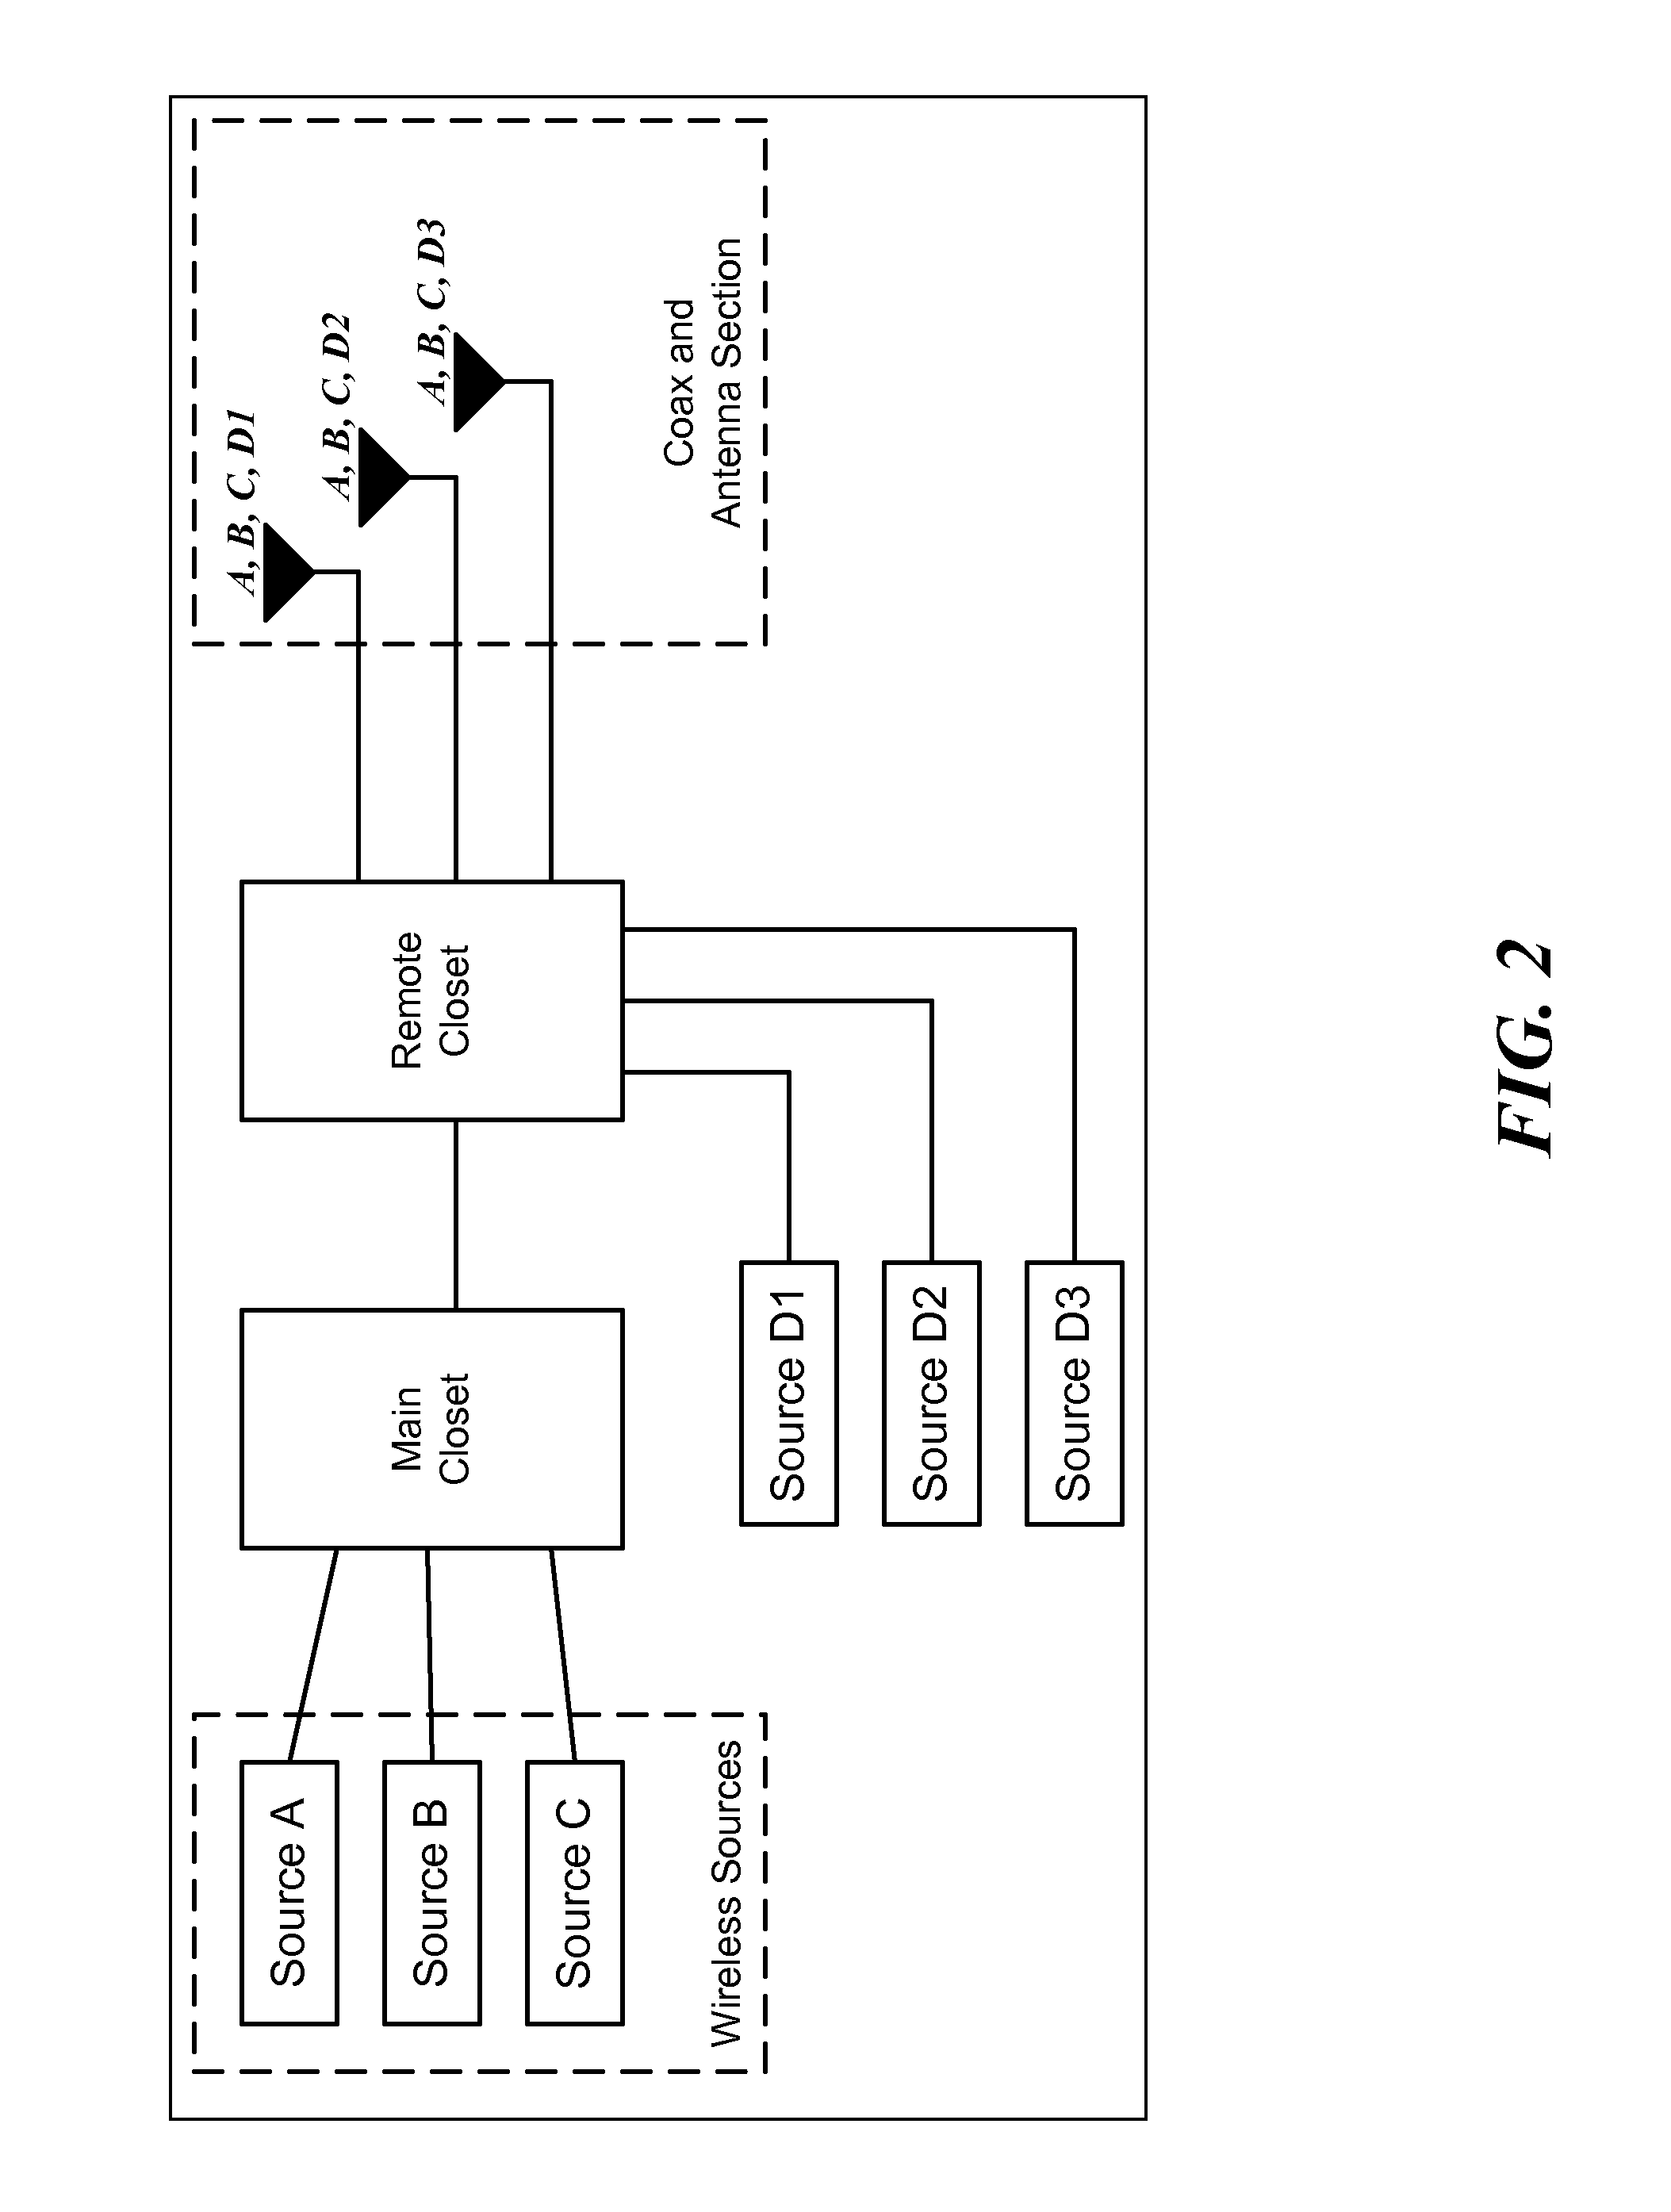 Method and System for Equalizing Cable Losses in a Distributed Antenna System